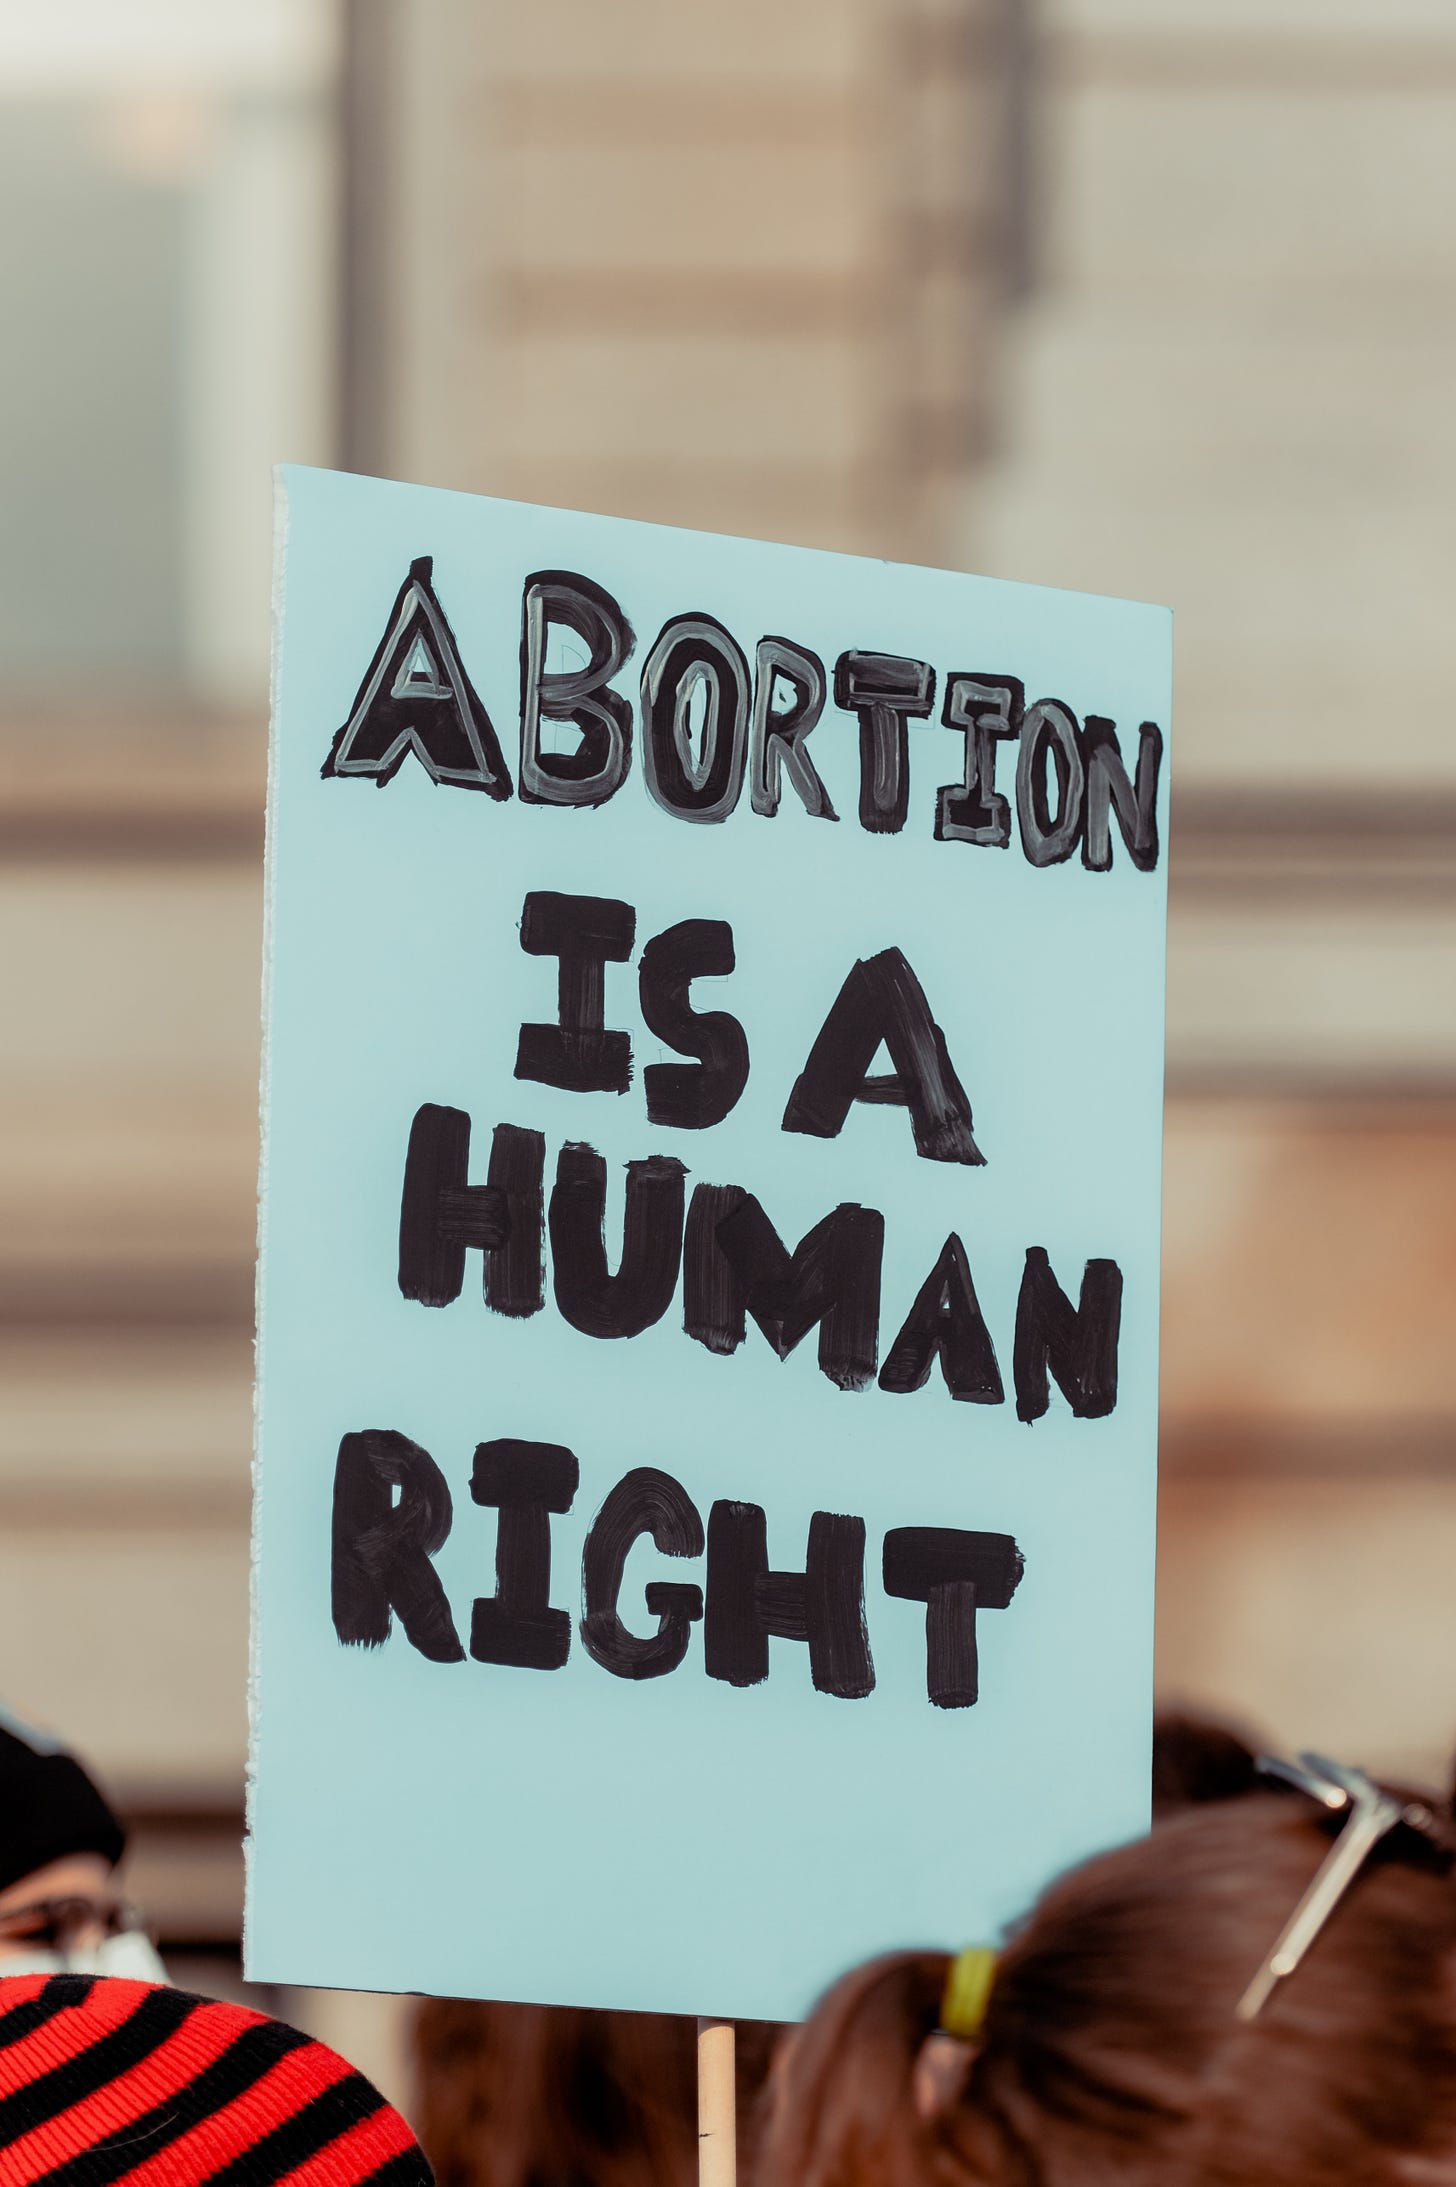 A close-up of a hand written sign. The sign says ‘Abortion Is A Human Right’.